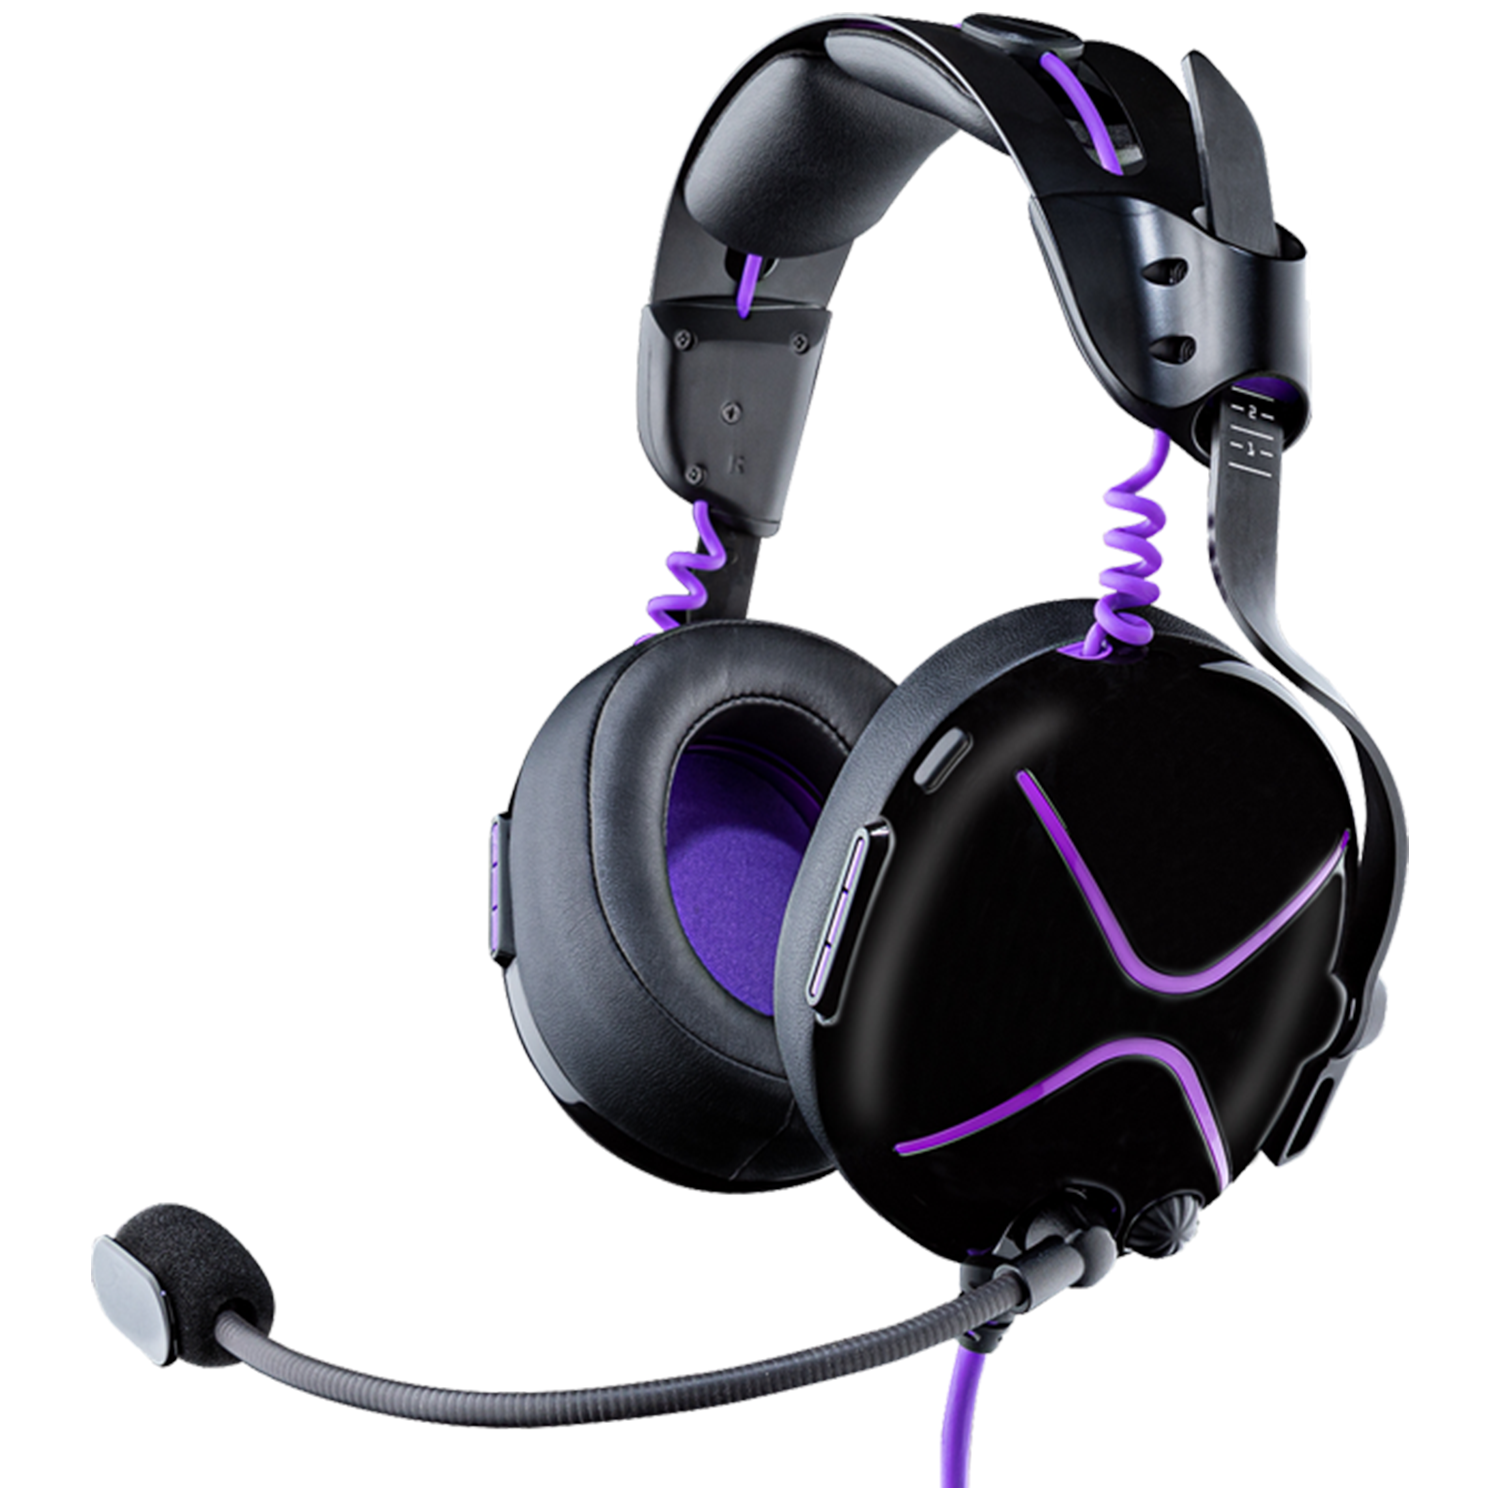 Series X|S & AF Xbox Pro PC Headset